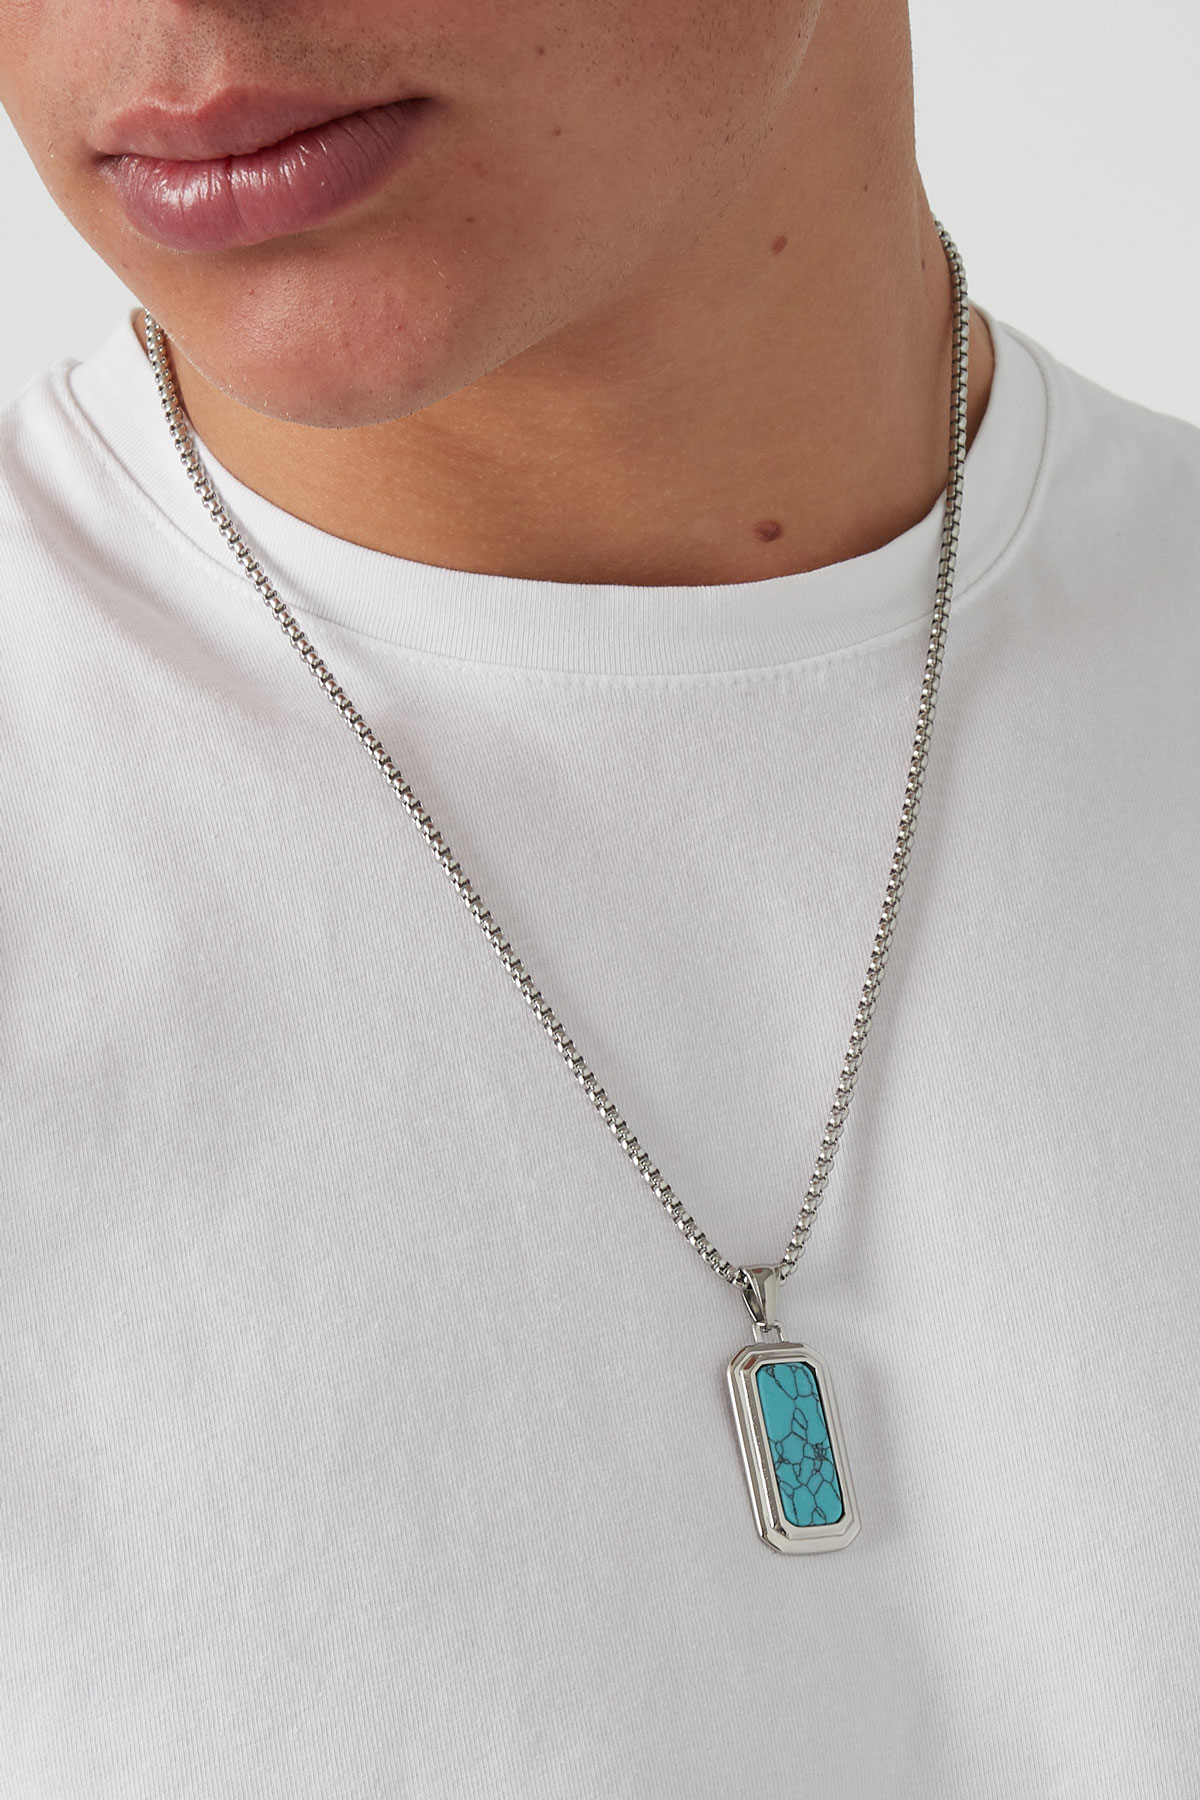 Men's necklace with pendant - turquoise  Picture3